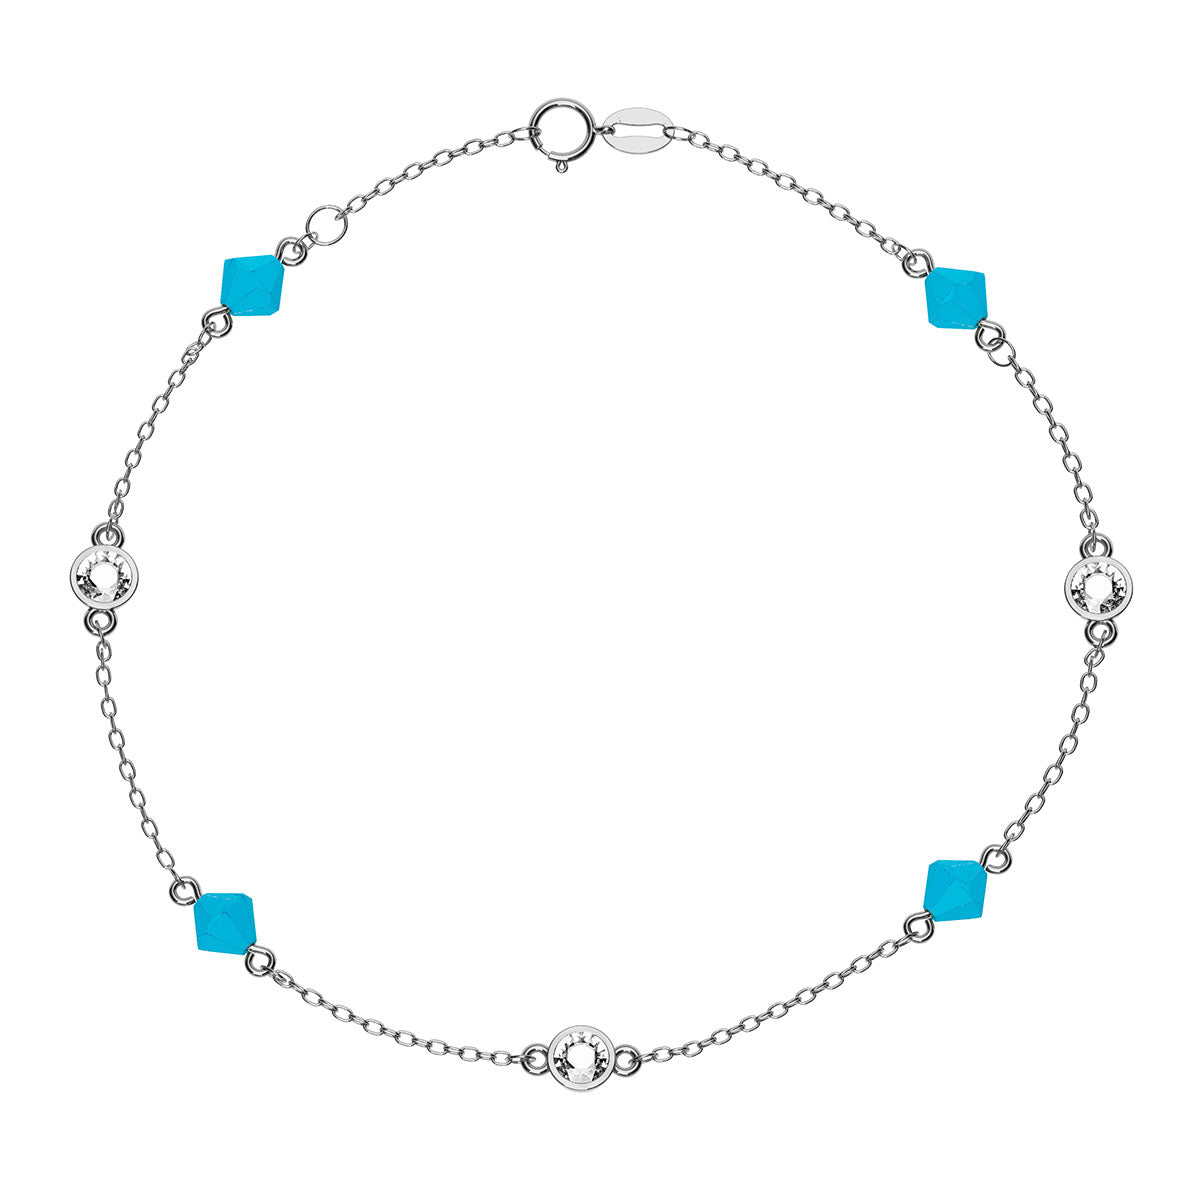 Rosary Style Bracelet With Stone Bezels and Turquoise Beads